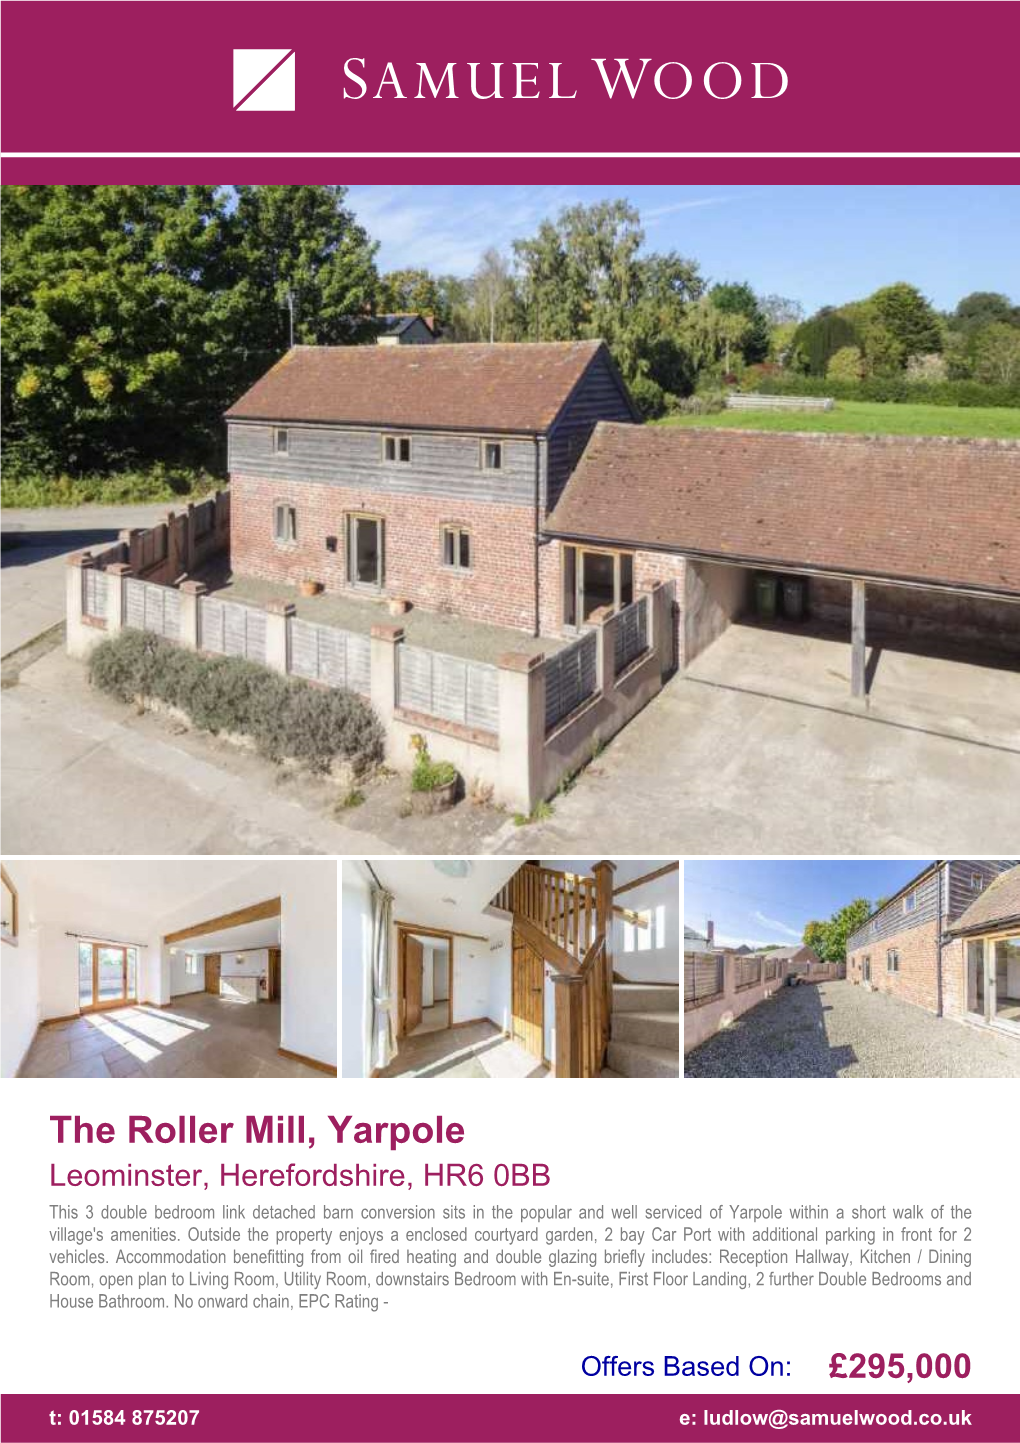 The Roller Mill, Yarpole